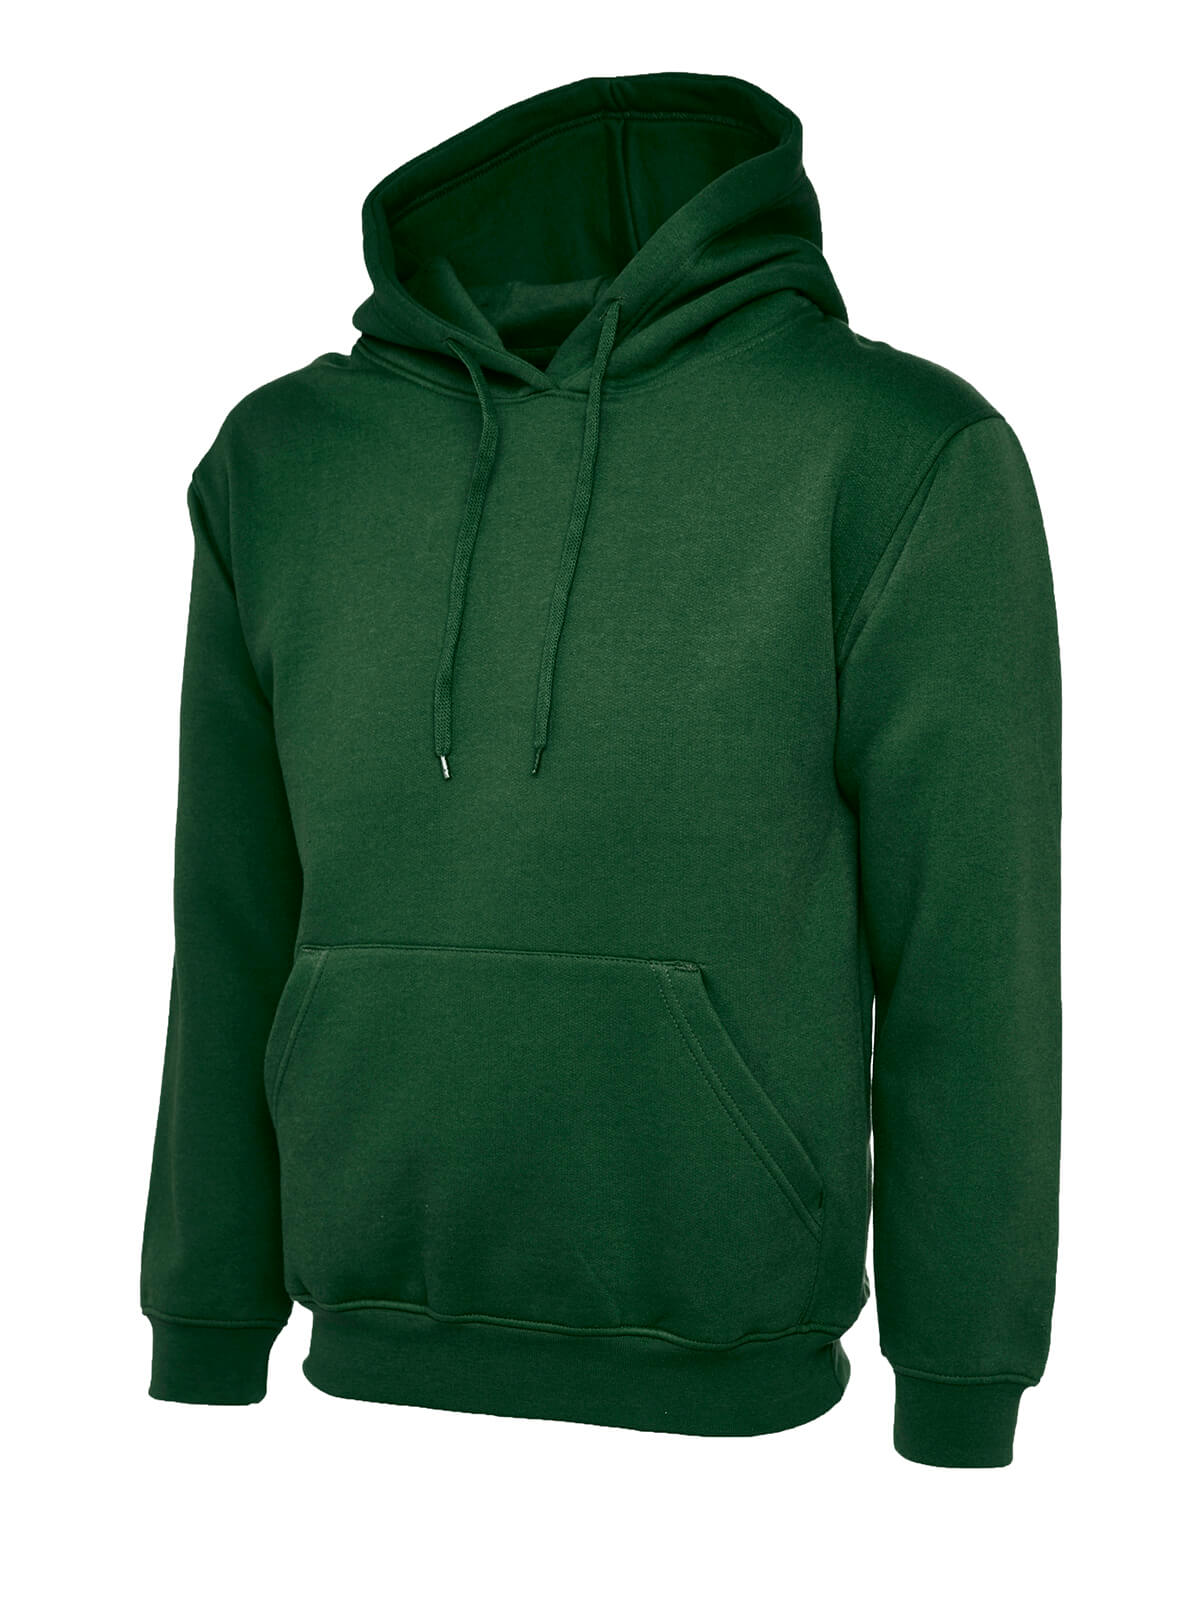 Plain Bottle Green Hooded Sweatshirt Jumper Pullover Double Fabric Soft Ribbed